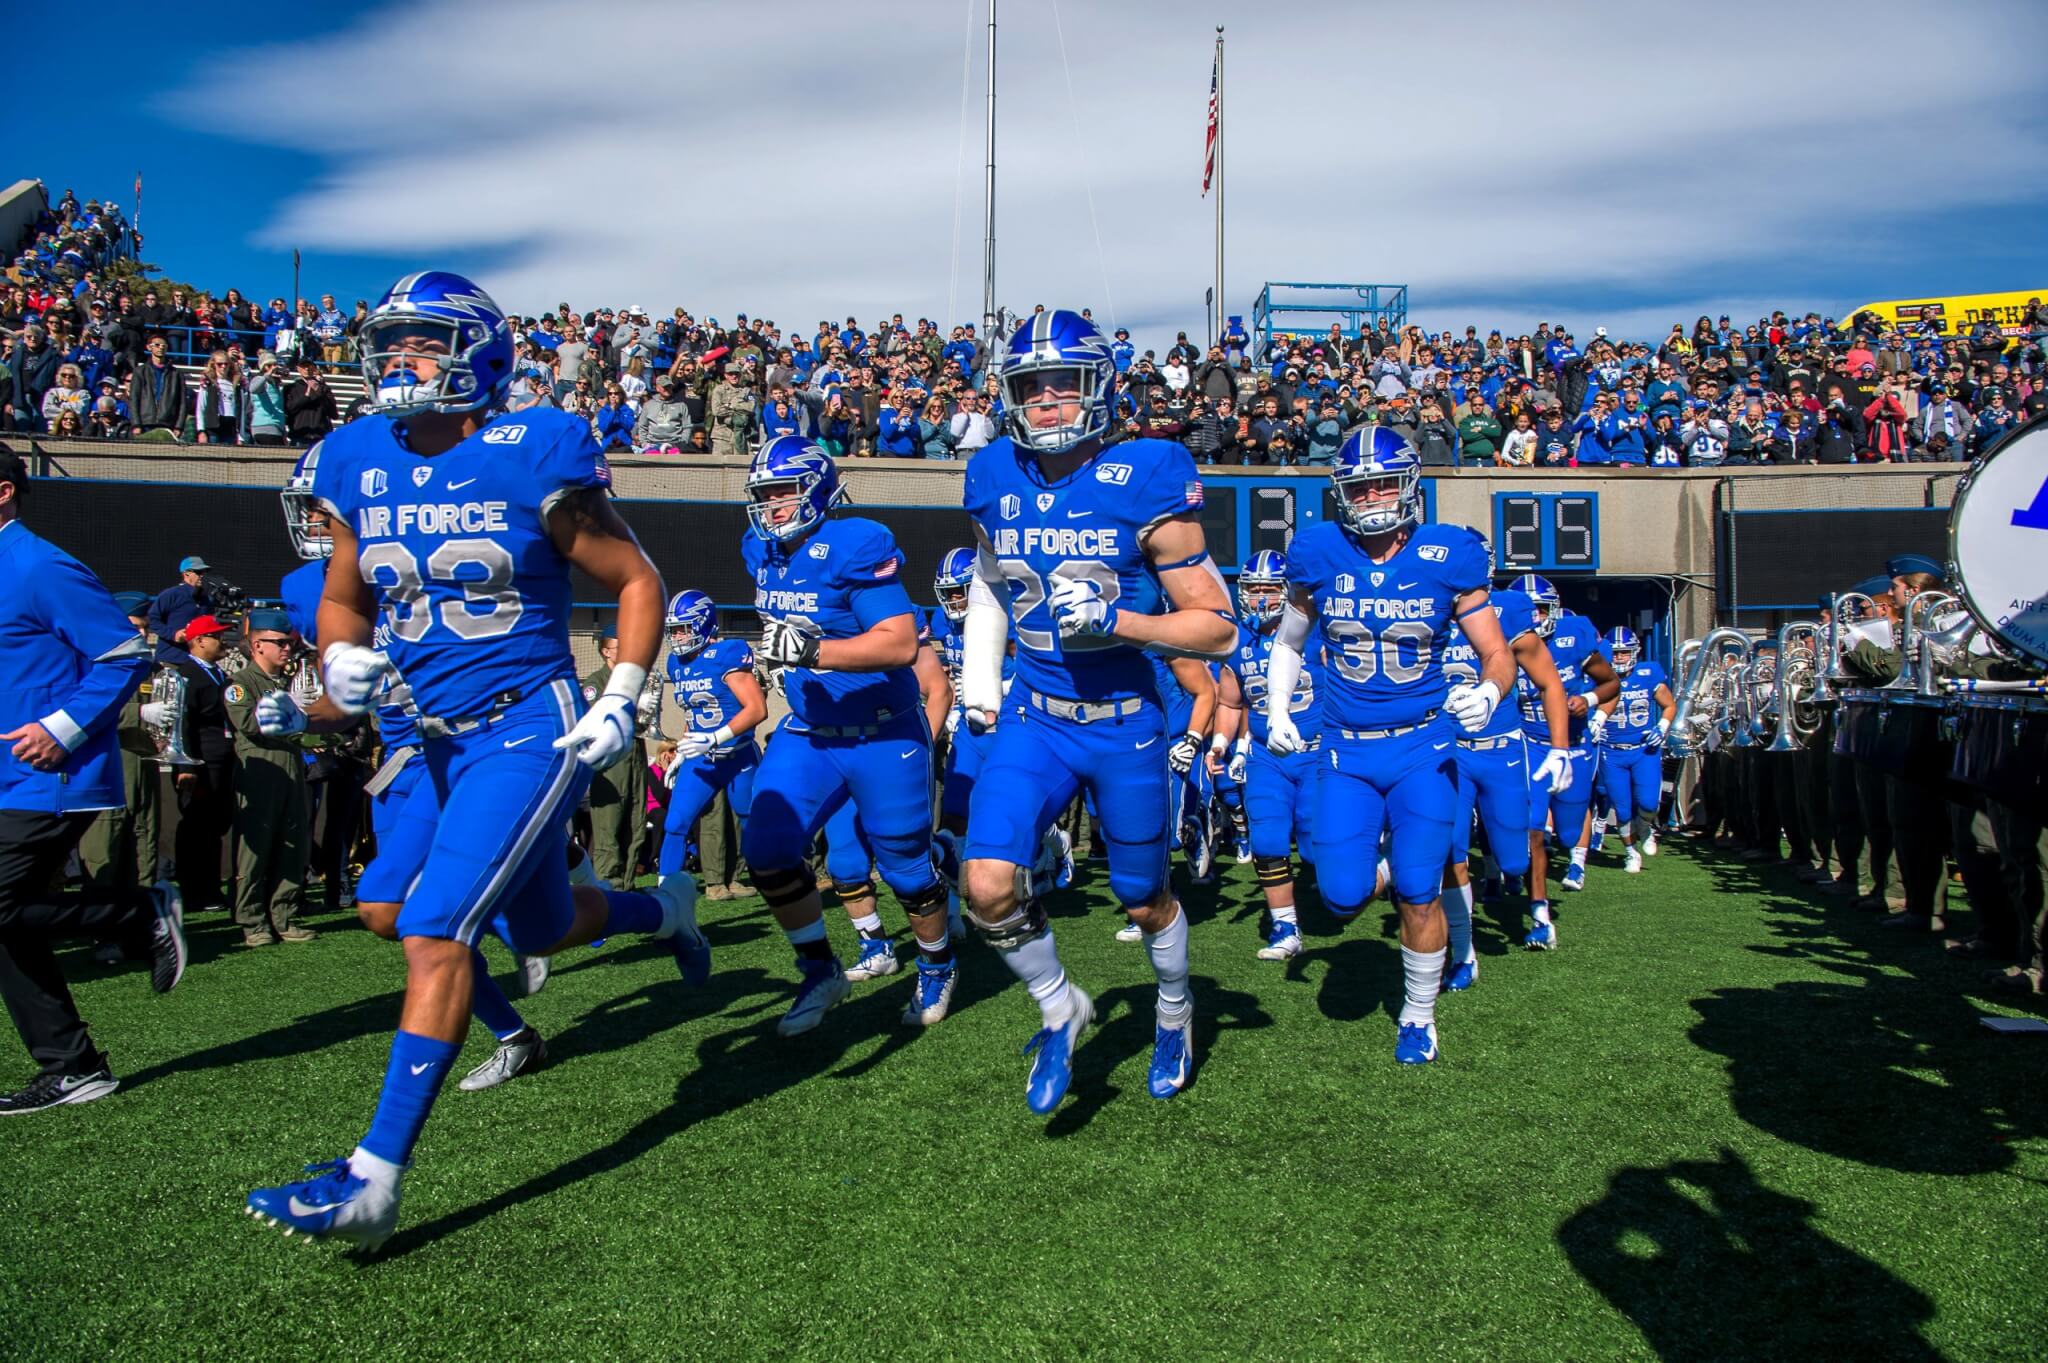 Air Force players take to the field prior to the opening kickoff in 2019 during a football game against Army at Falcon Stadium.  Photo/Trevor Cokley.